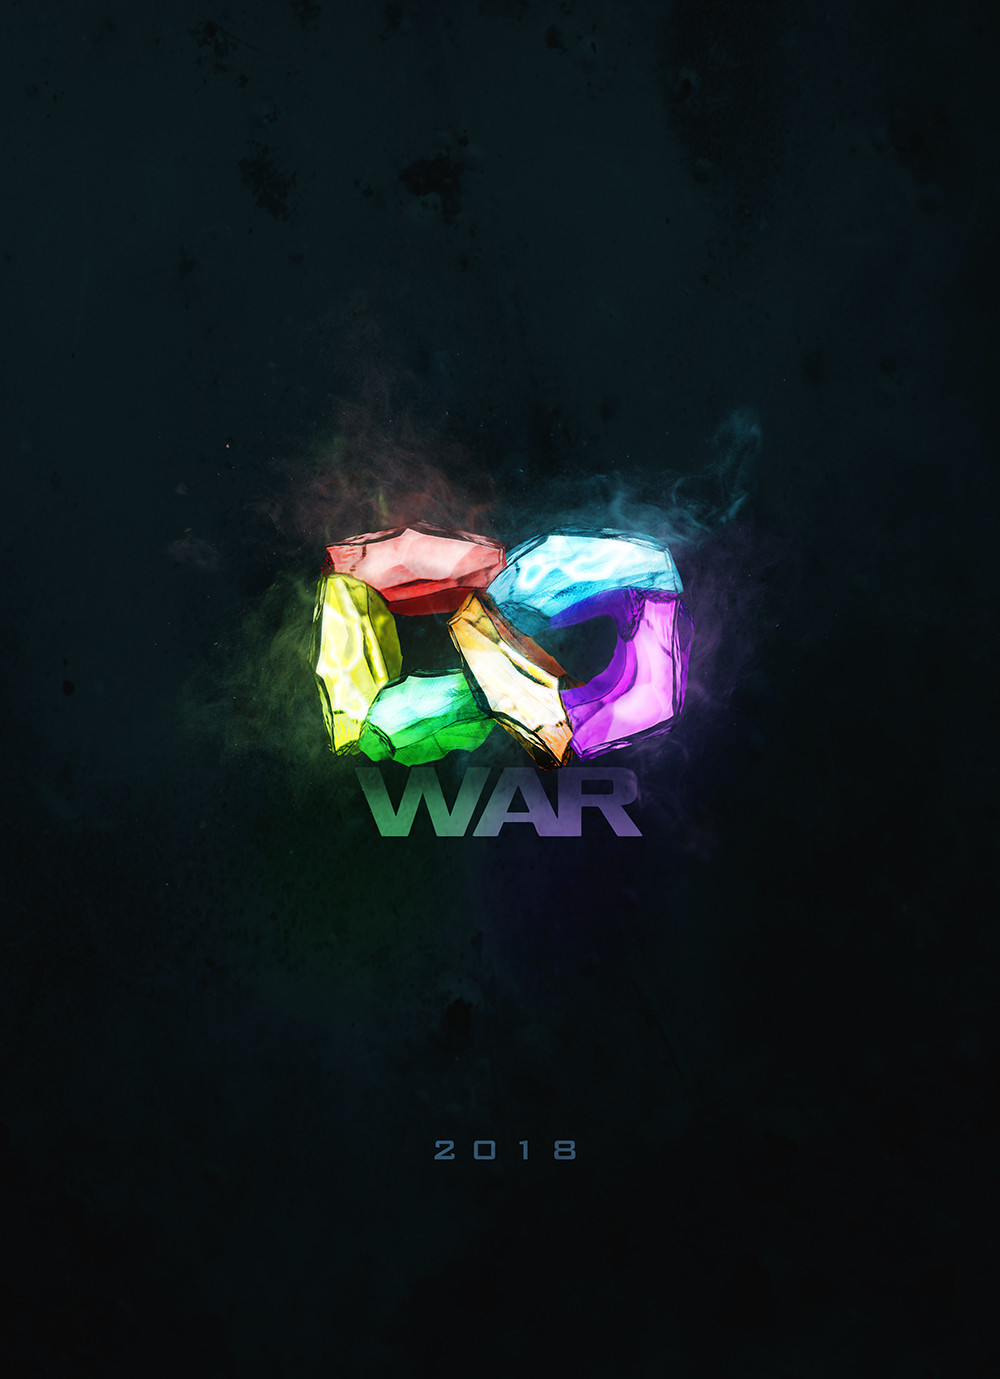 Avengers: Infinity War Picture by BossLogic